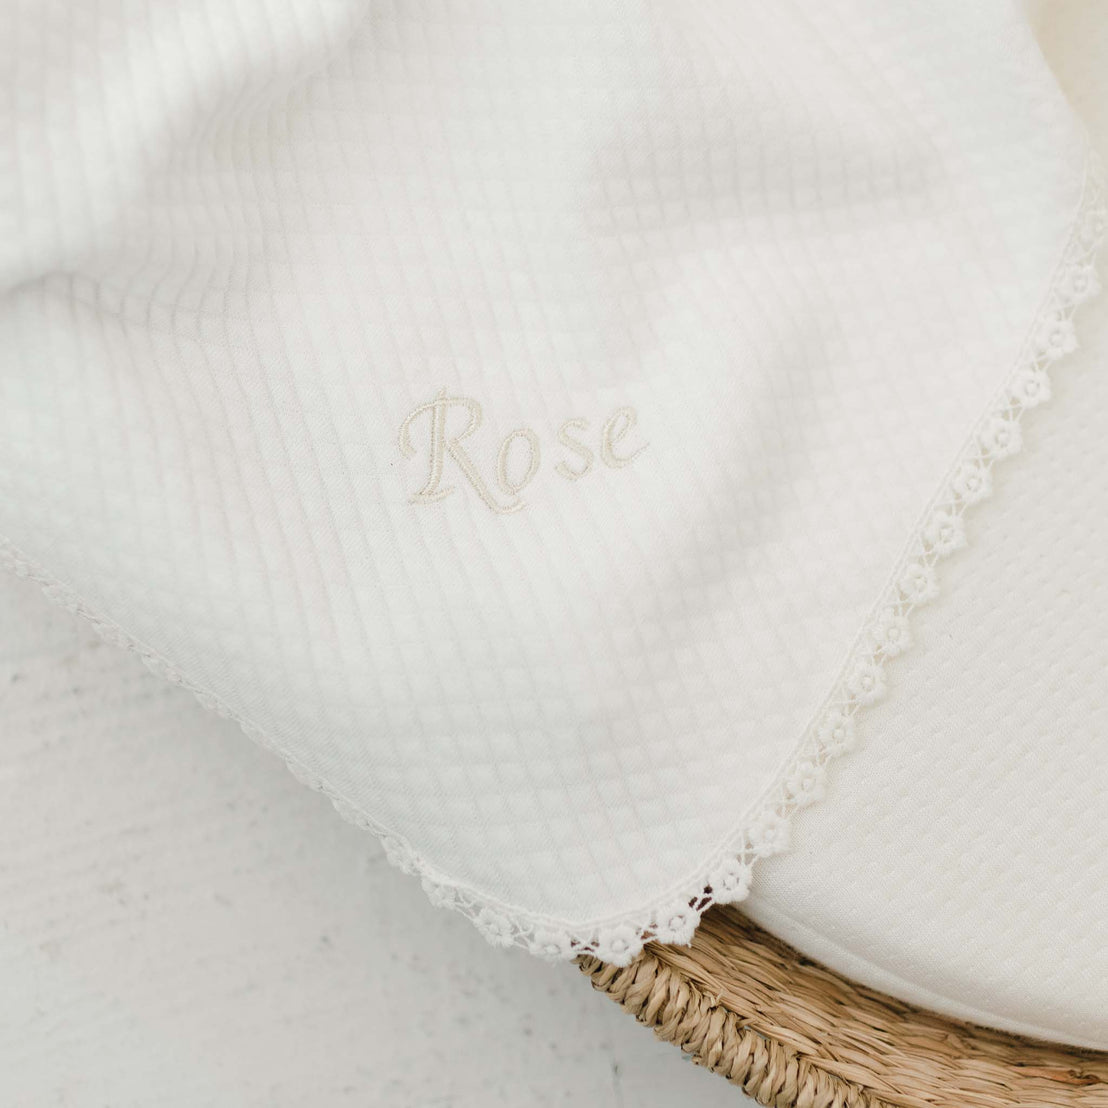 Close-up of a traditional white personalized blanket with the name "rose" embroidered in elegant script, framed by delicate lace trim, resting on an upscale wicker basket against a white background.